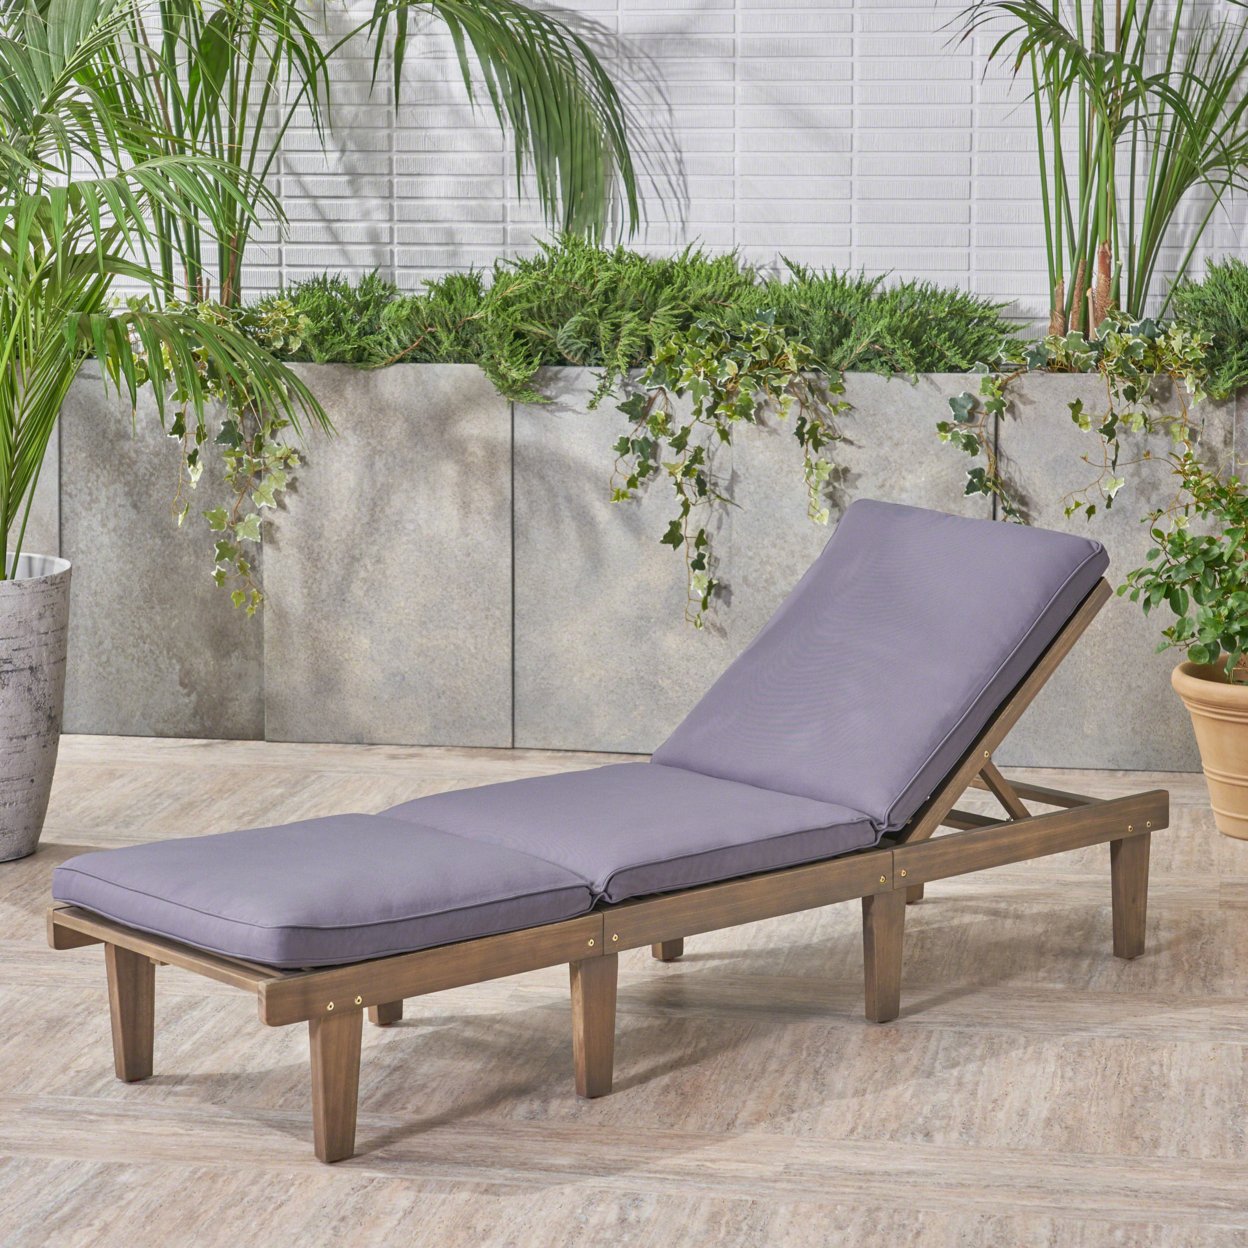 Alisa Outdoor Acacia Wood Chaise Lounge With Cushion, Gray And Dark Gray - Set Of 2